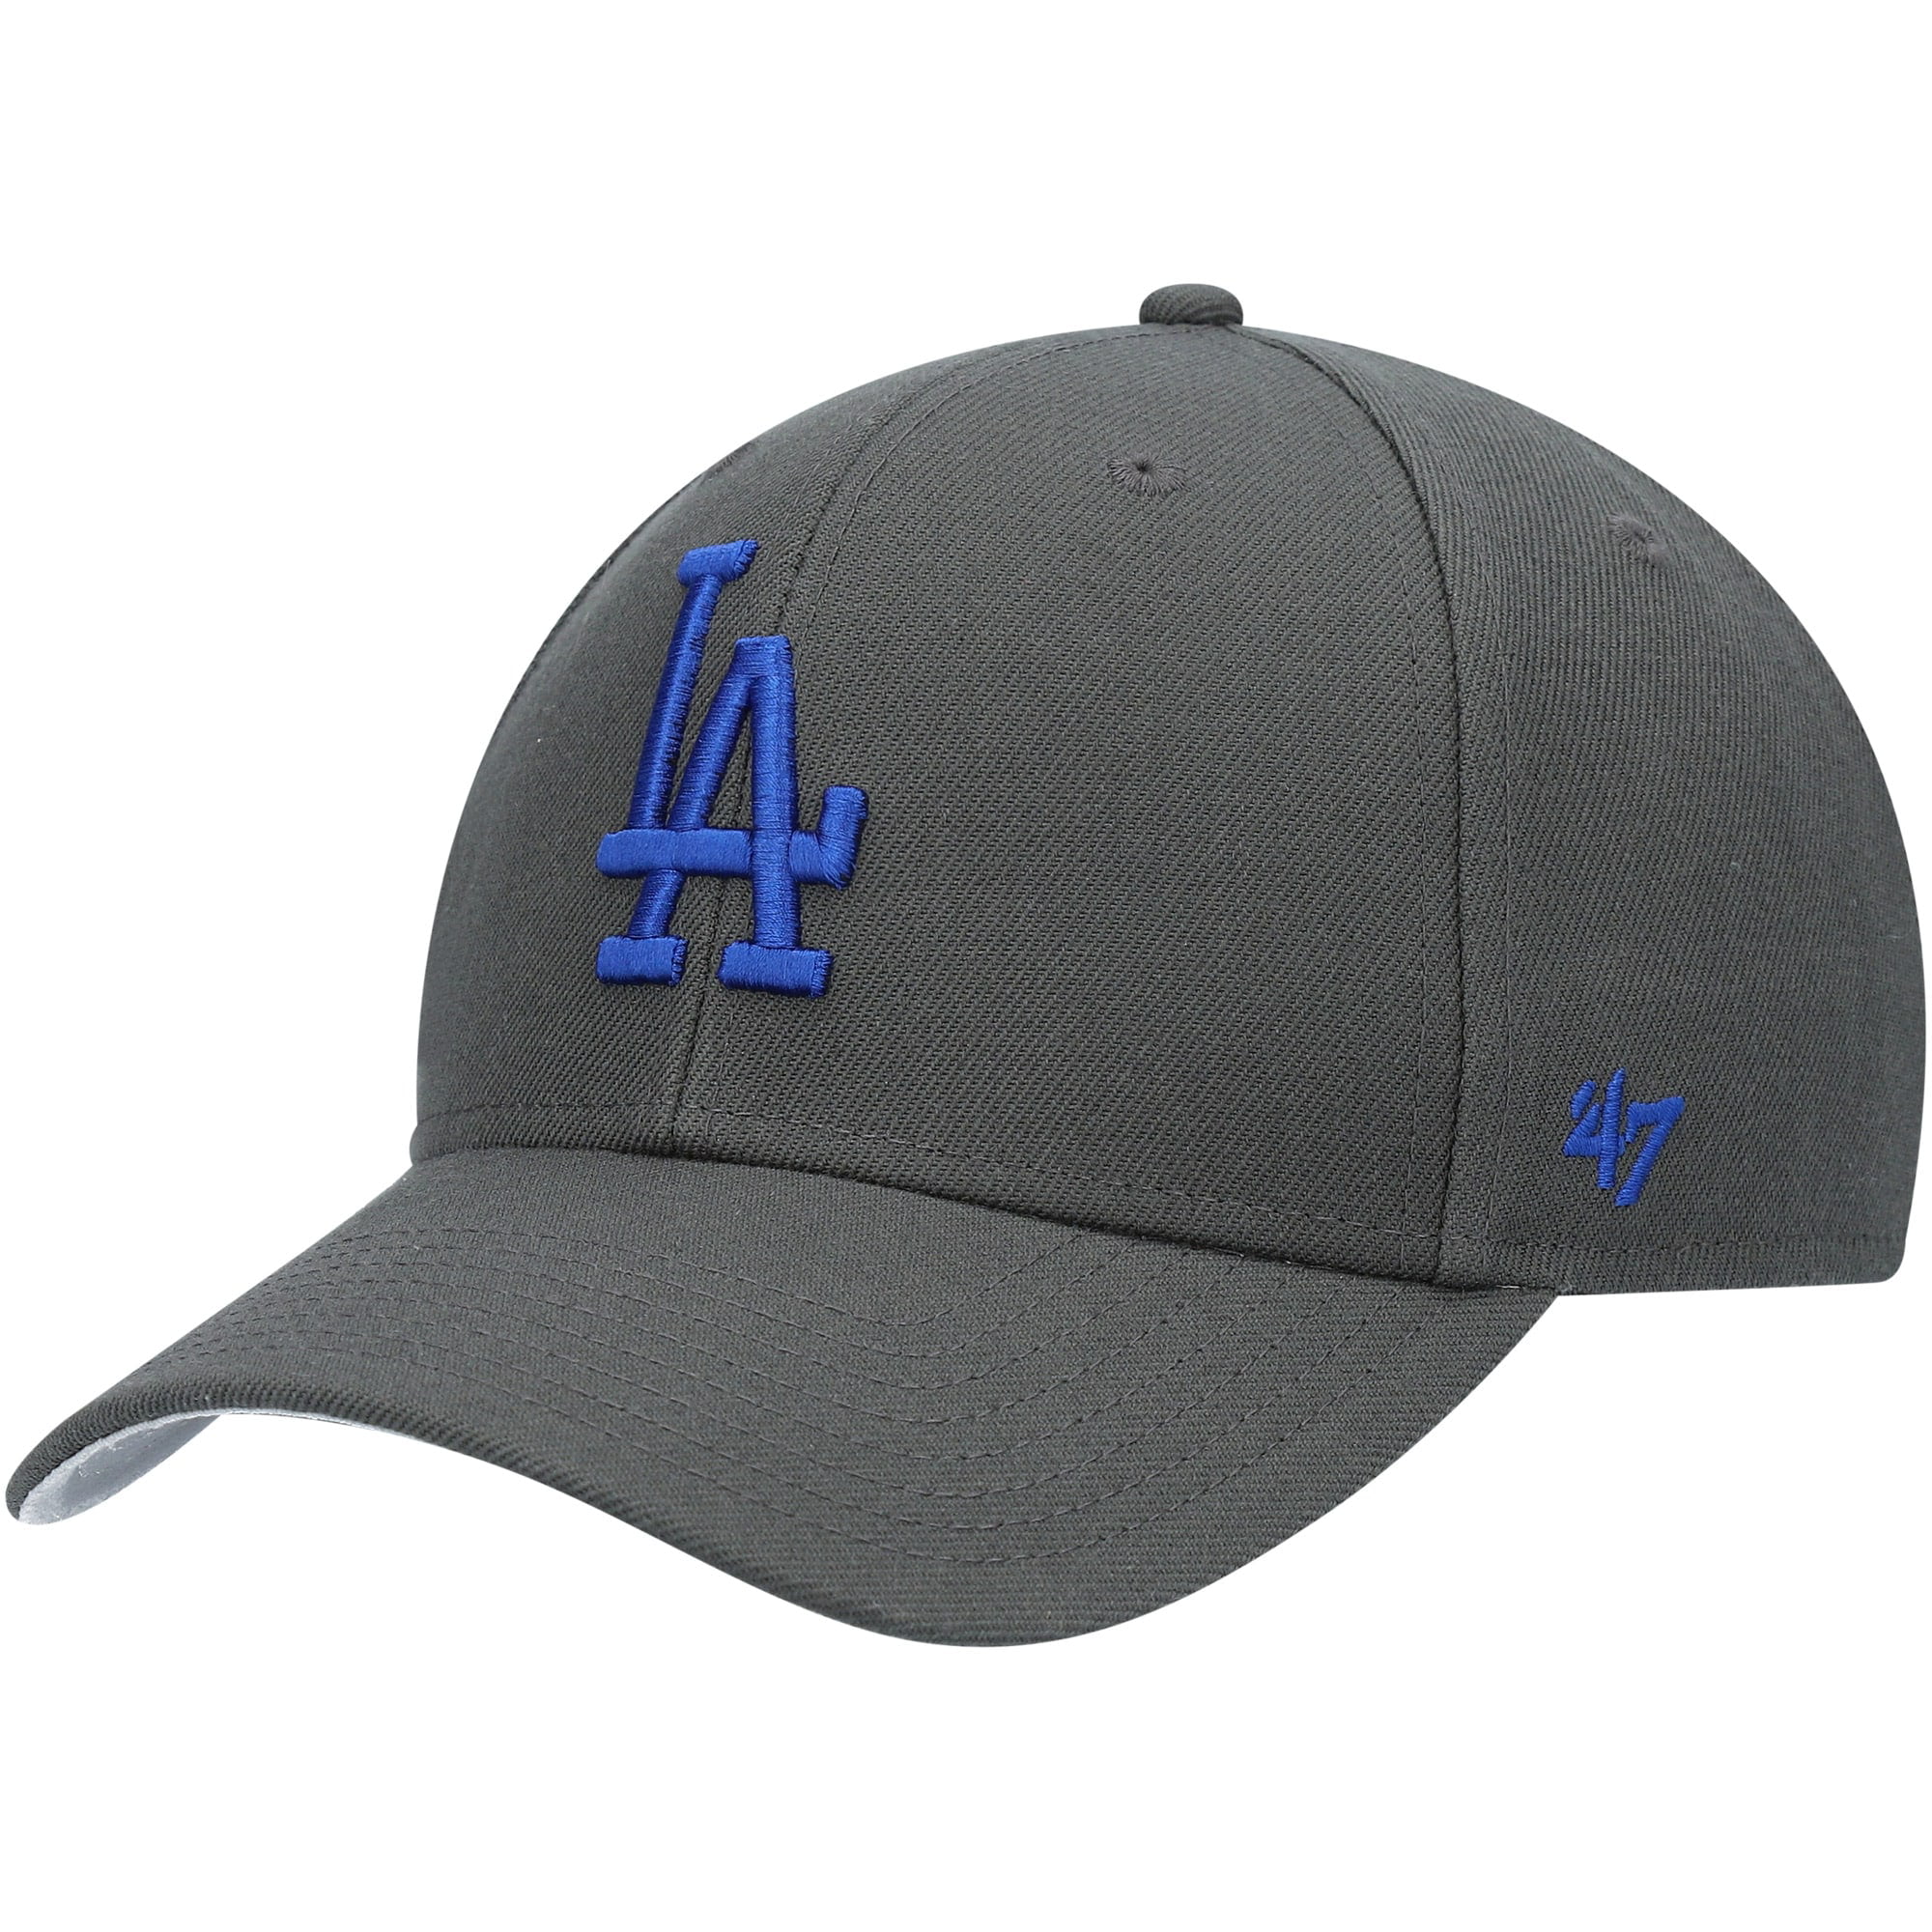 47 Los Angeles Dodgers Charcoal Gray MVP Wool Hat Adjustable Structured Cap 